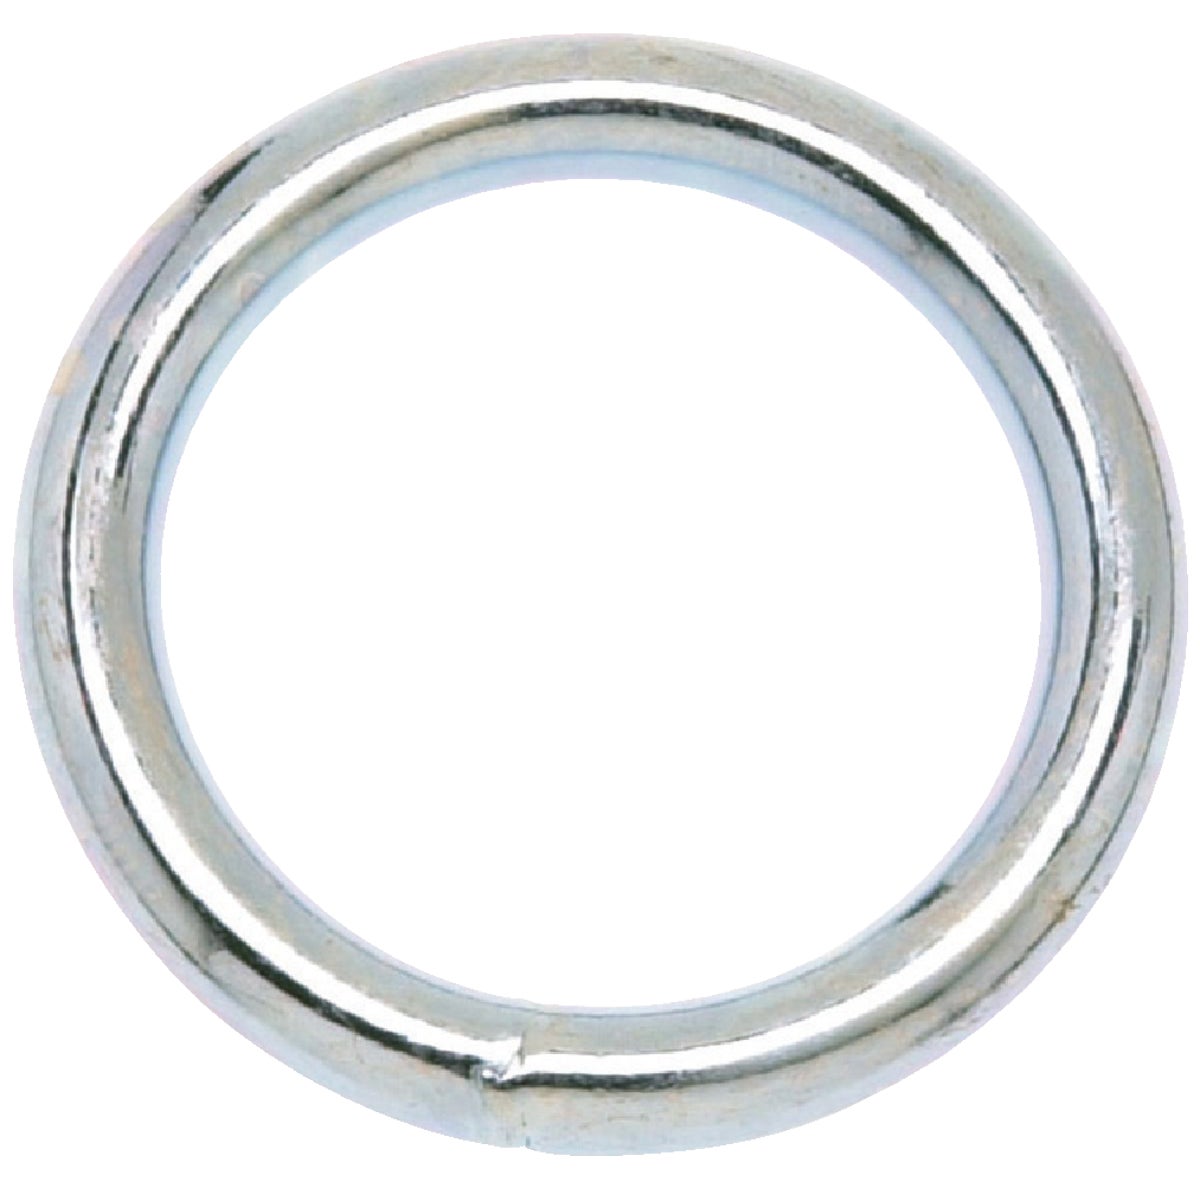 Item 713892, Durable welded metal round ring.